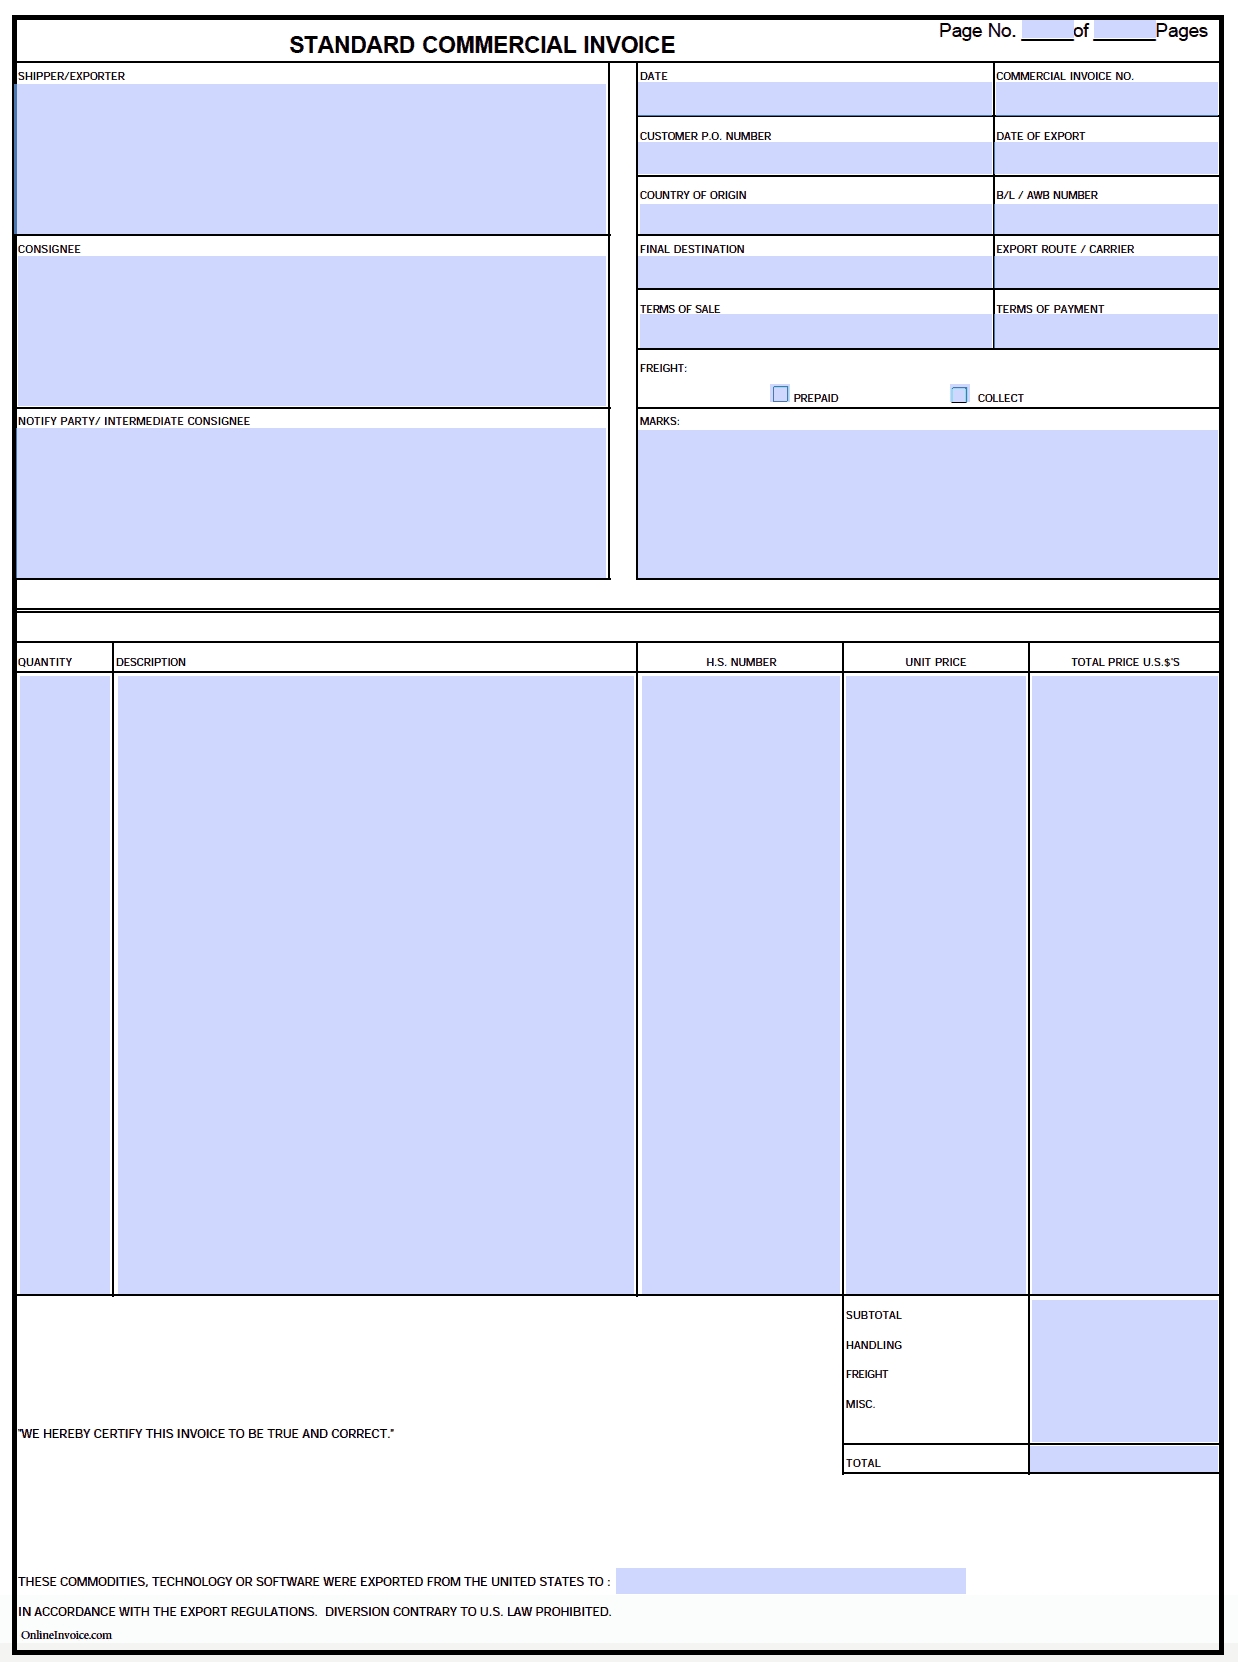 commercial invoice template onlineinvoice customs invoice jamaica import